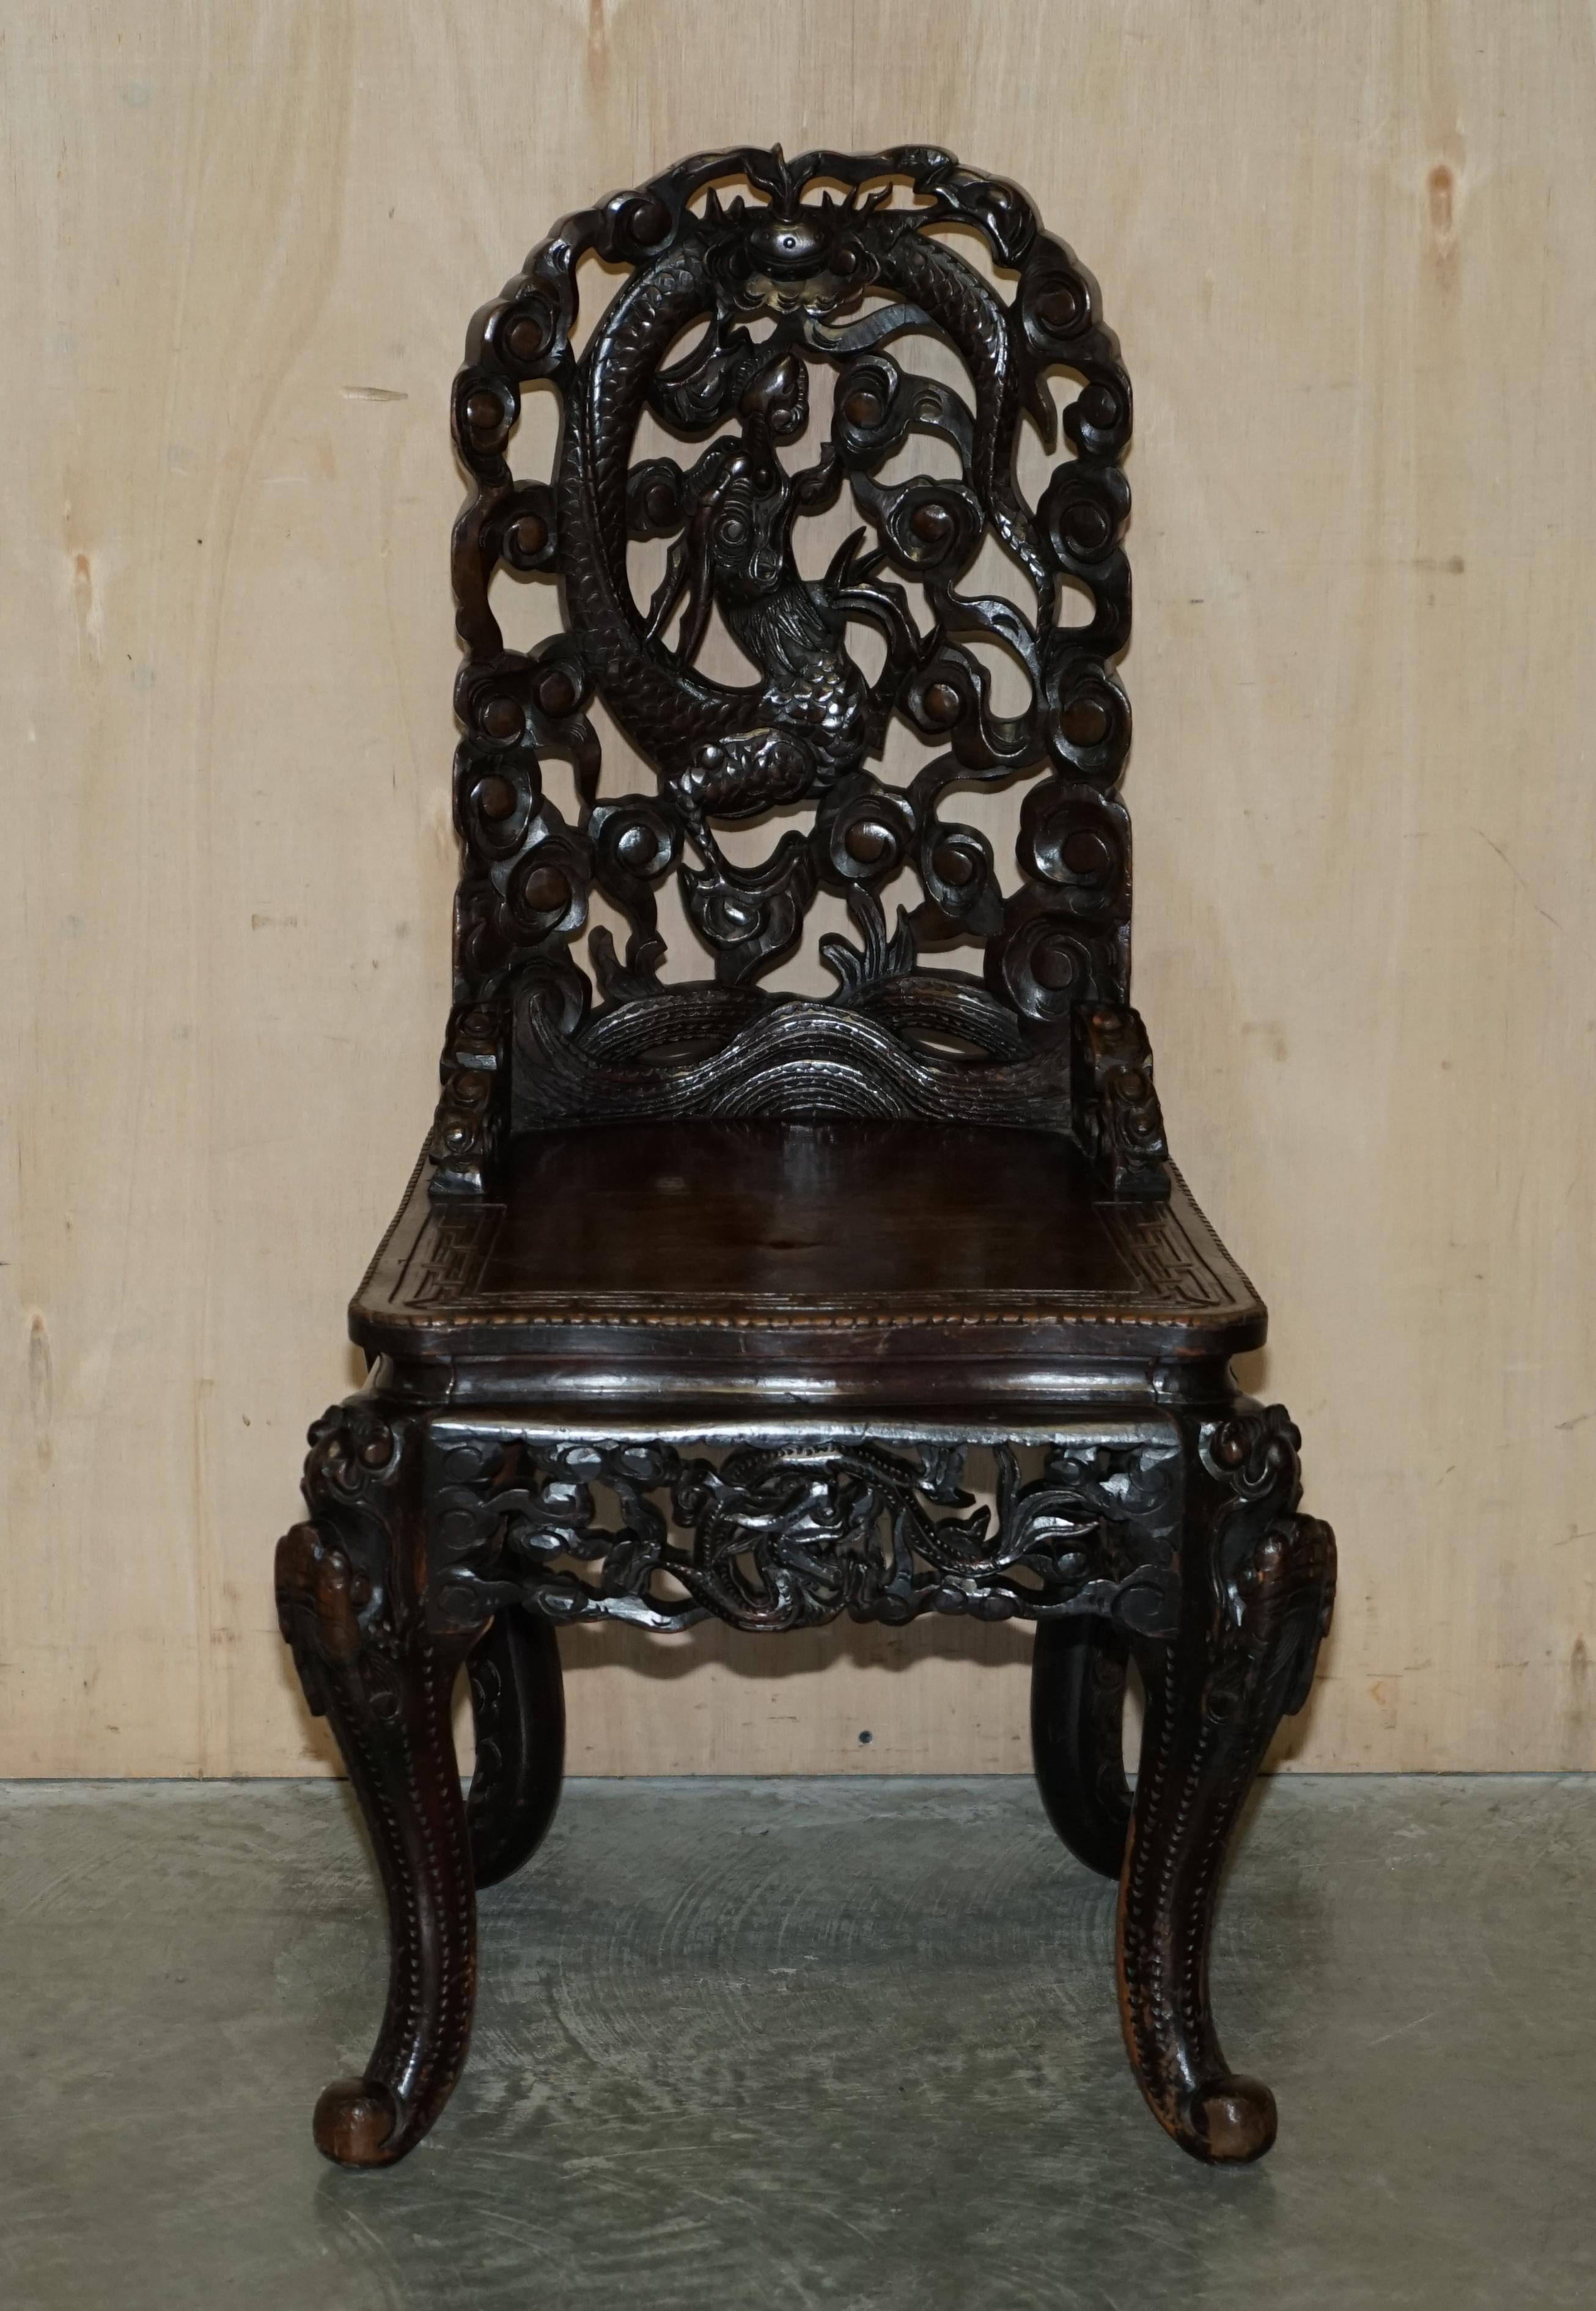 We are delighted to offer for sale this stunning original Chinese Export circa 1920 hand carved Throne chair with oversized Dragon back rest

A very good looking well-made and decorative chair, made during the export era of 1920, these were